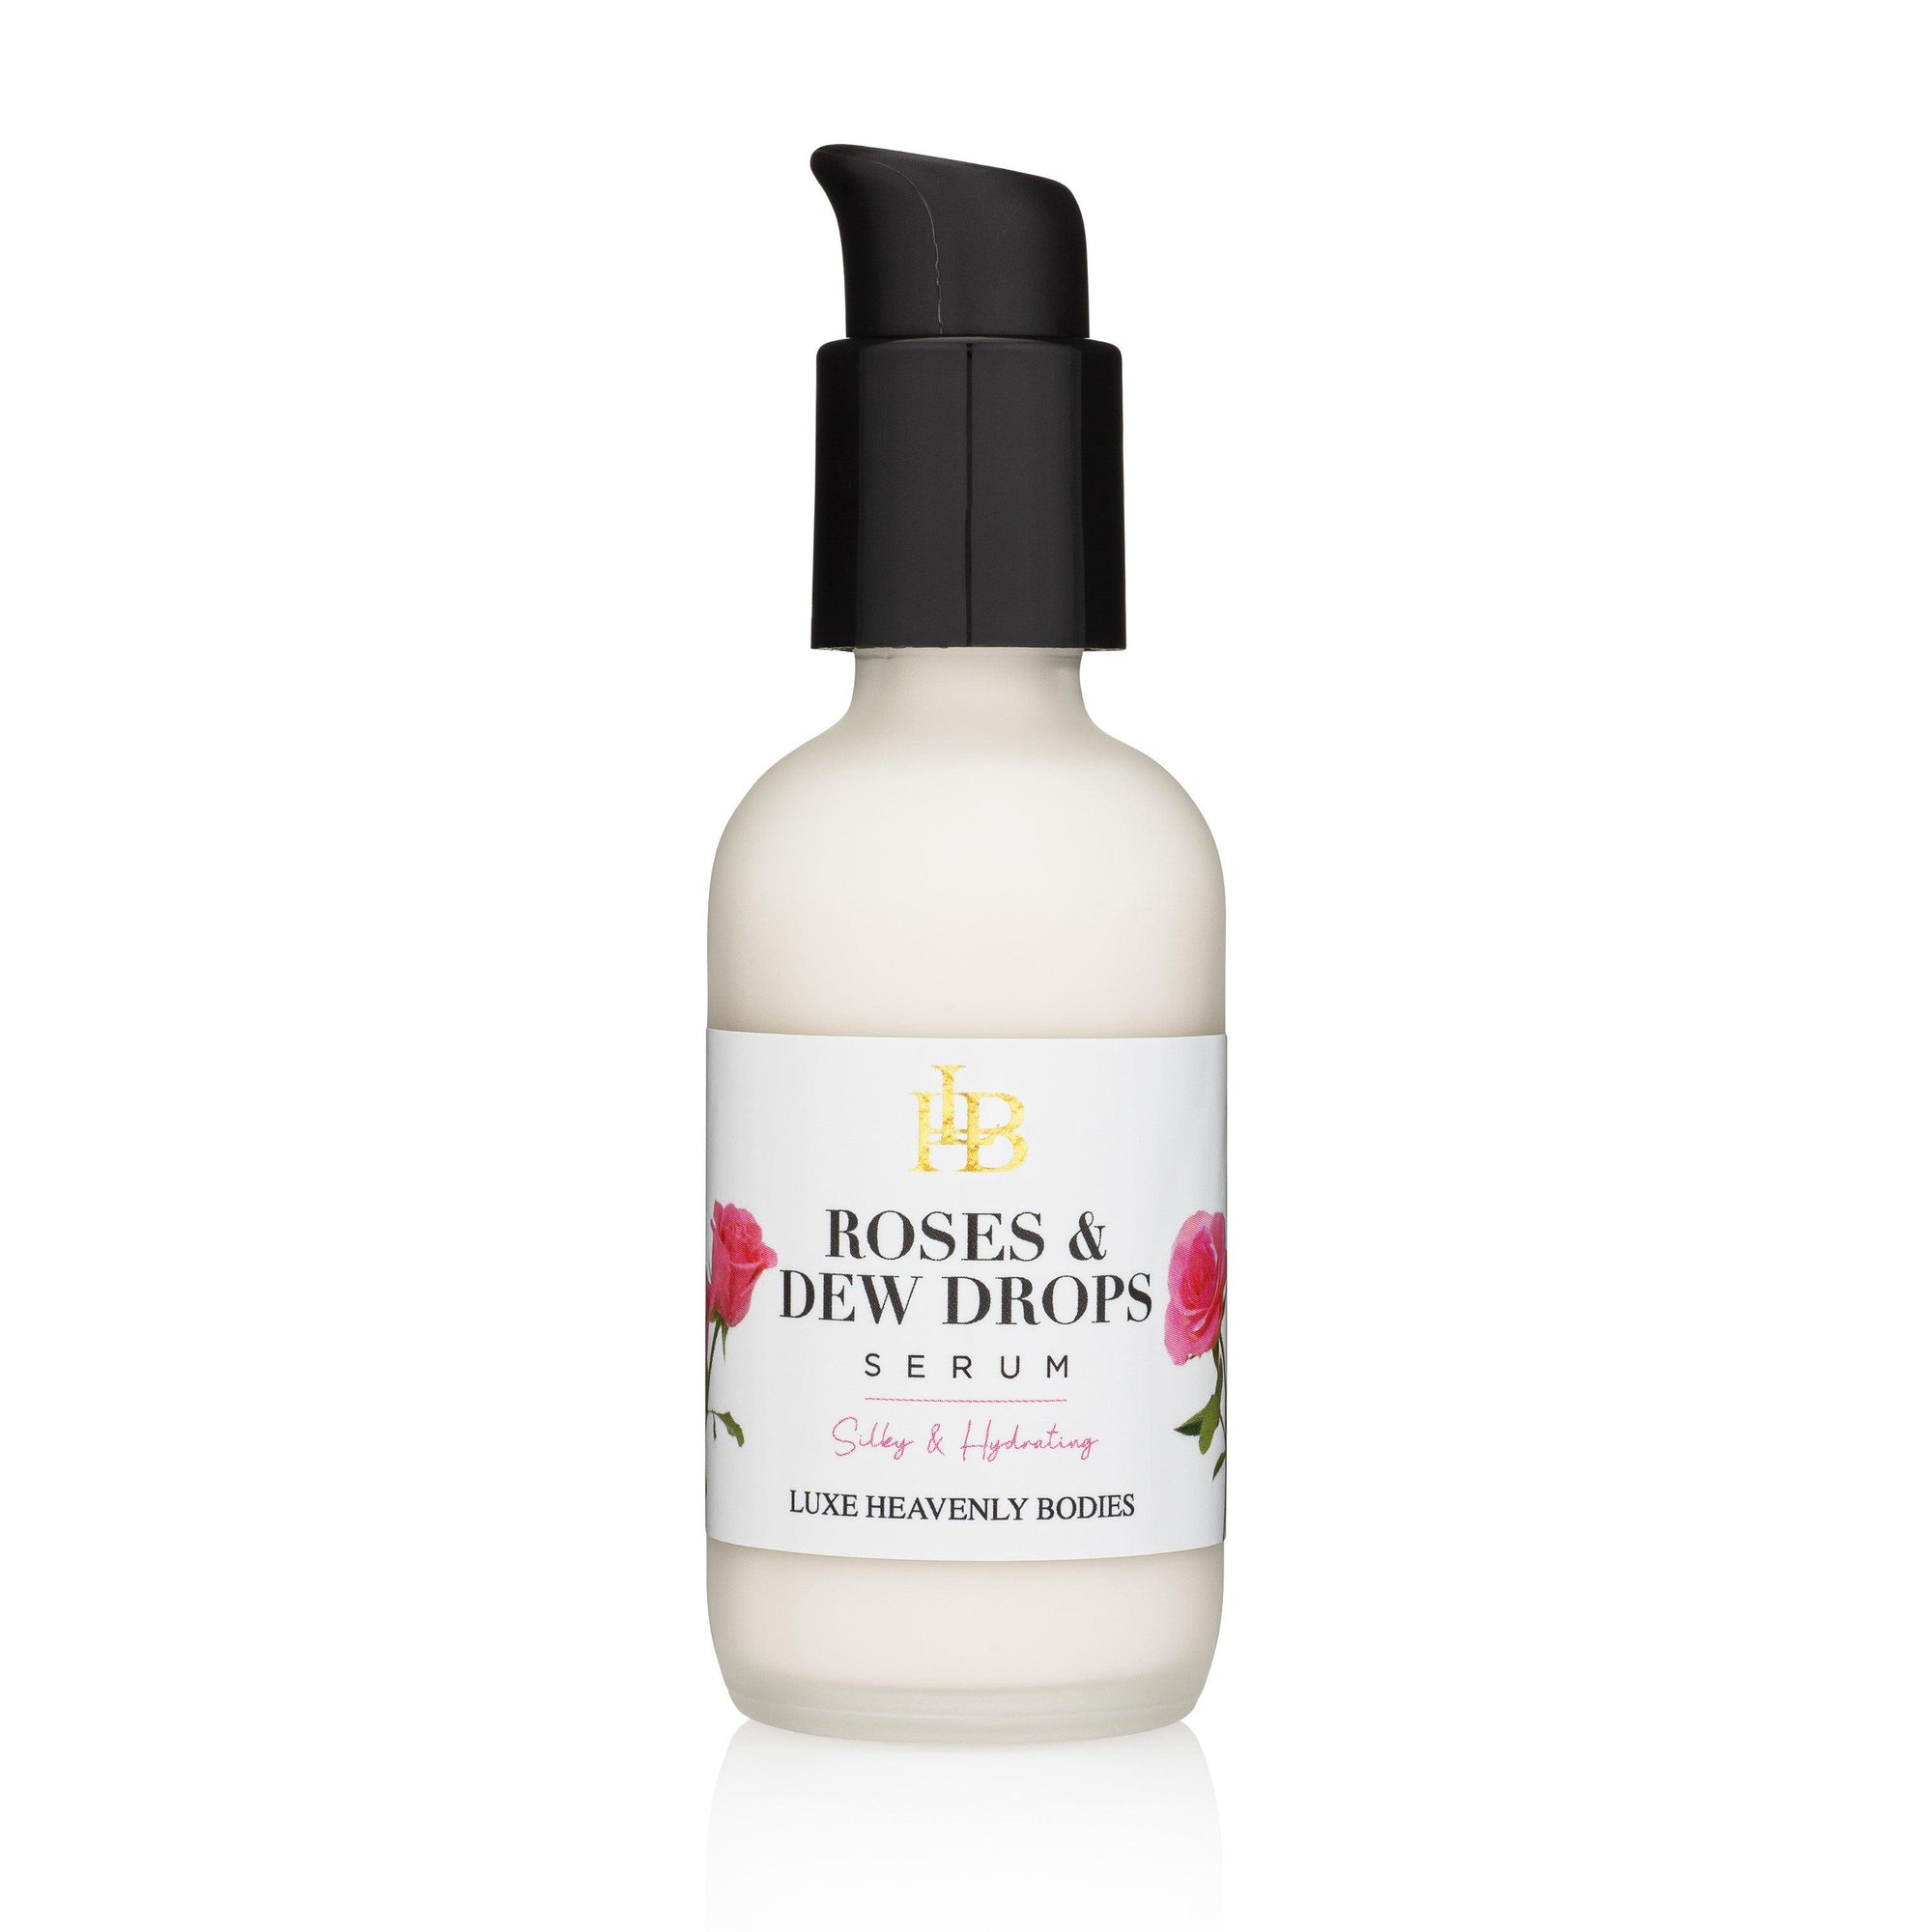 Roses & Dew Drops - LUXE Heavenly Bodies